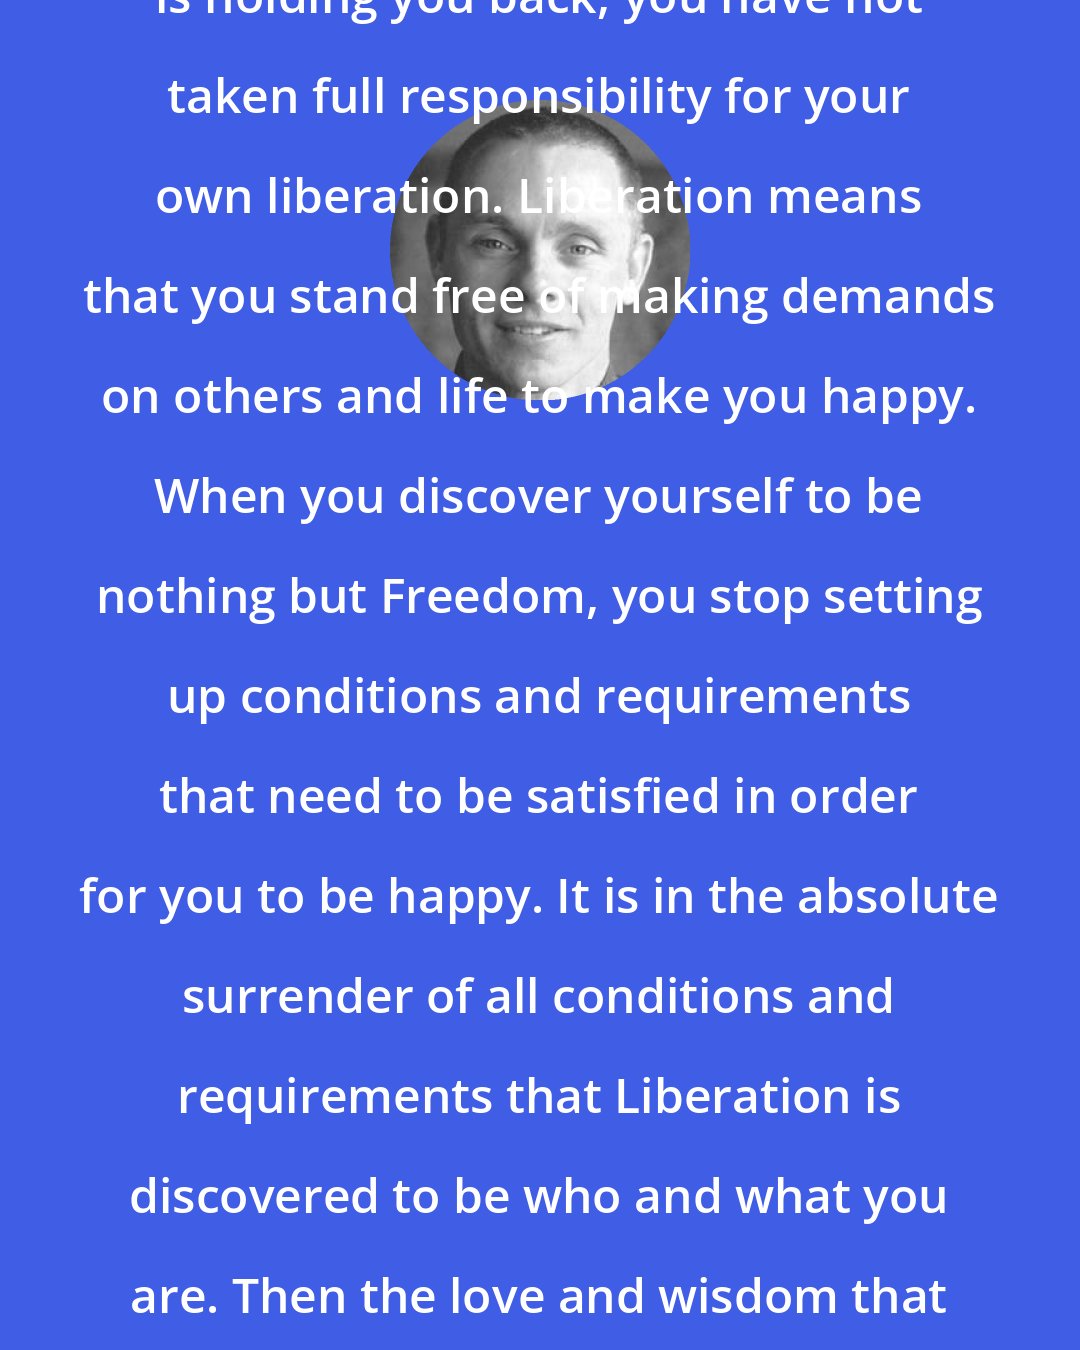 Adyashanti: As long as you perceive that anyone is holding you back, you have not taken full responsibility for your own liberation. Liberation means that you stand free of making demands on others and life to make you happy. When you discover yourself to be nothing but Freedom, you stop setting up conditions and requirements that need to be satisfied in order for you to be happy. It is in the absolute surrender of all conditions and requirements that Liberation is discovered to be who and what you are. Then the love and wisdom that flows out of you has a liberating effect on others.